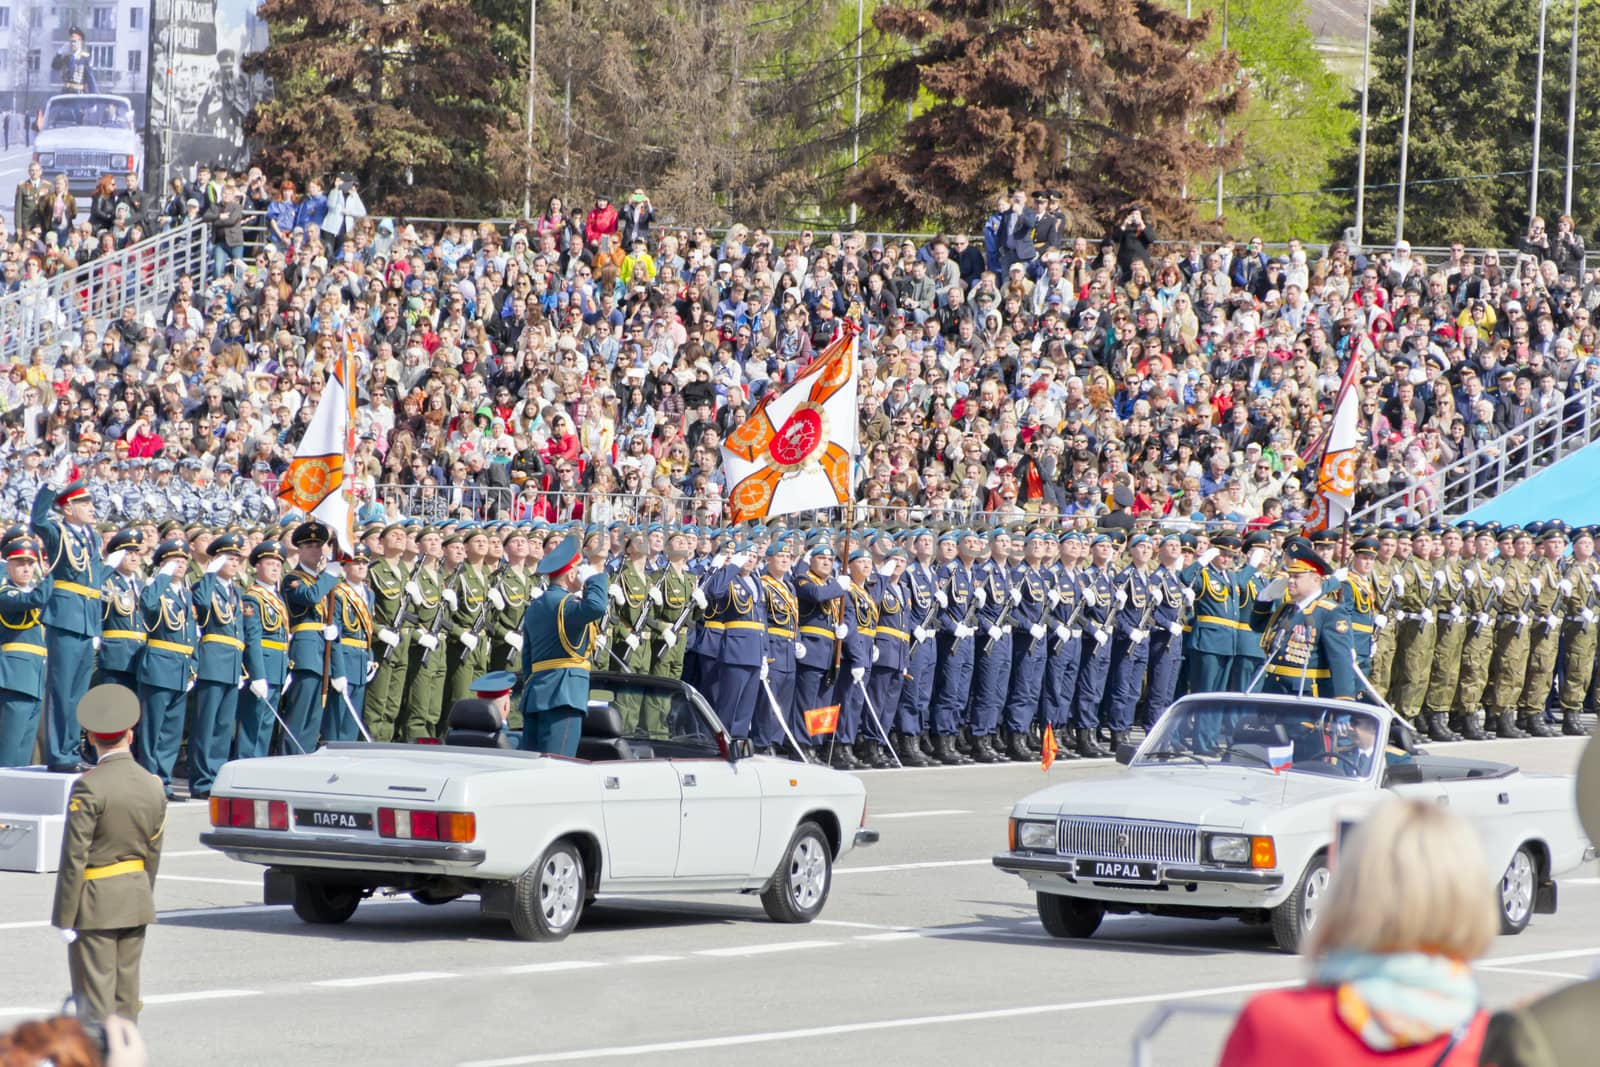 Russian ceremony of the opening military parade on annual Victor by Julialine